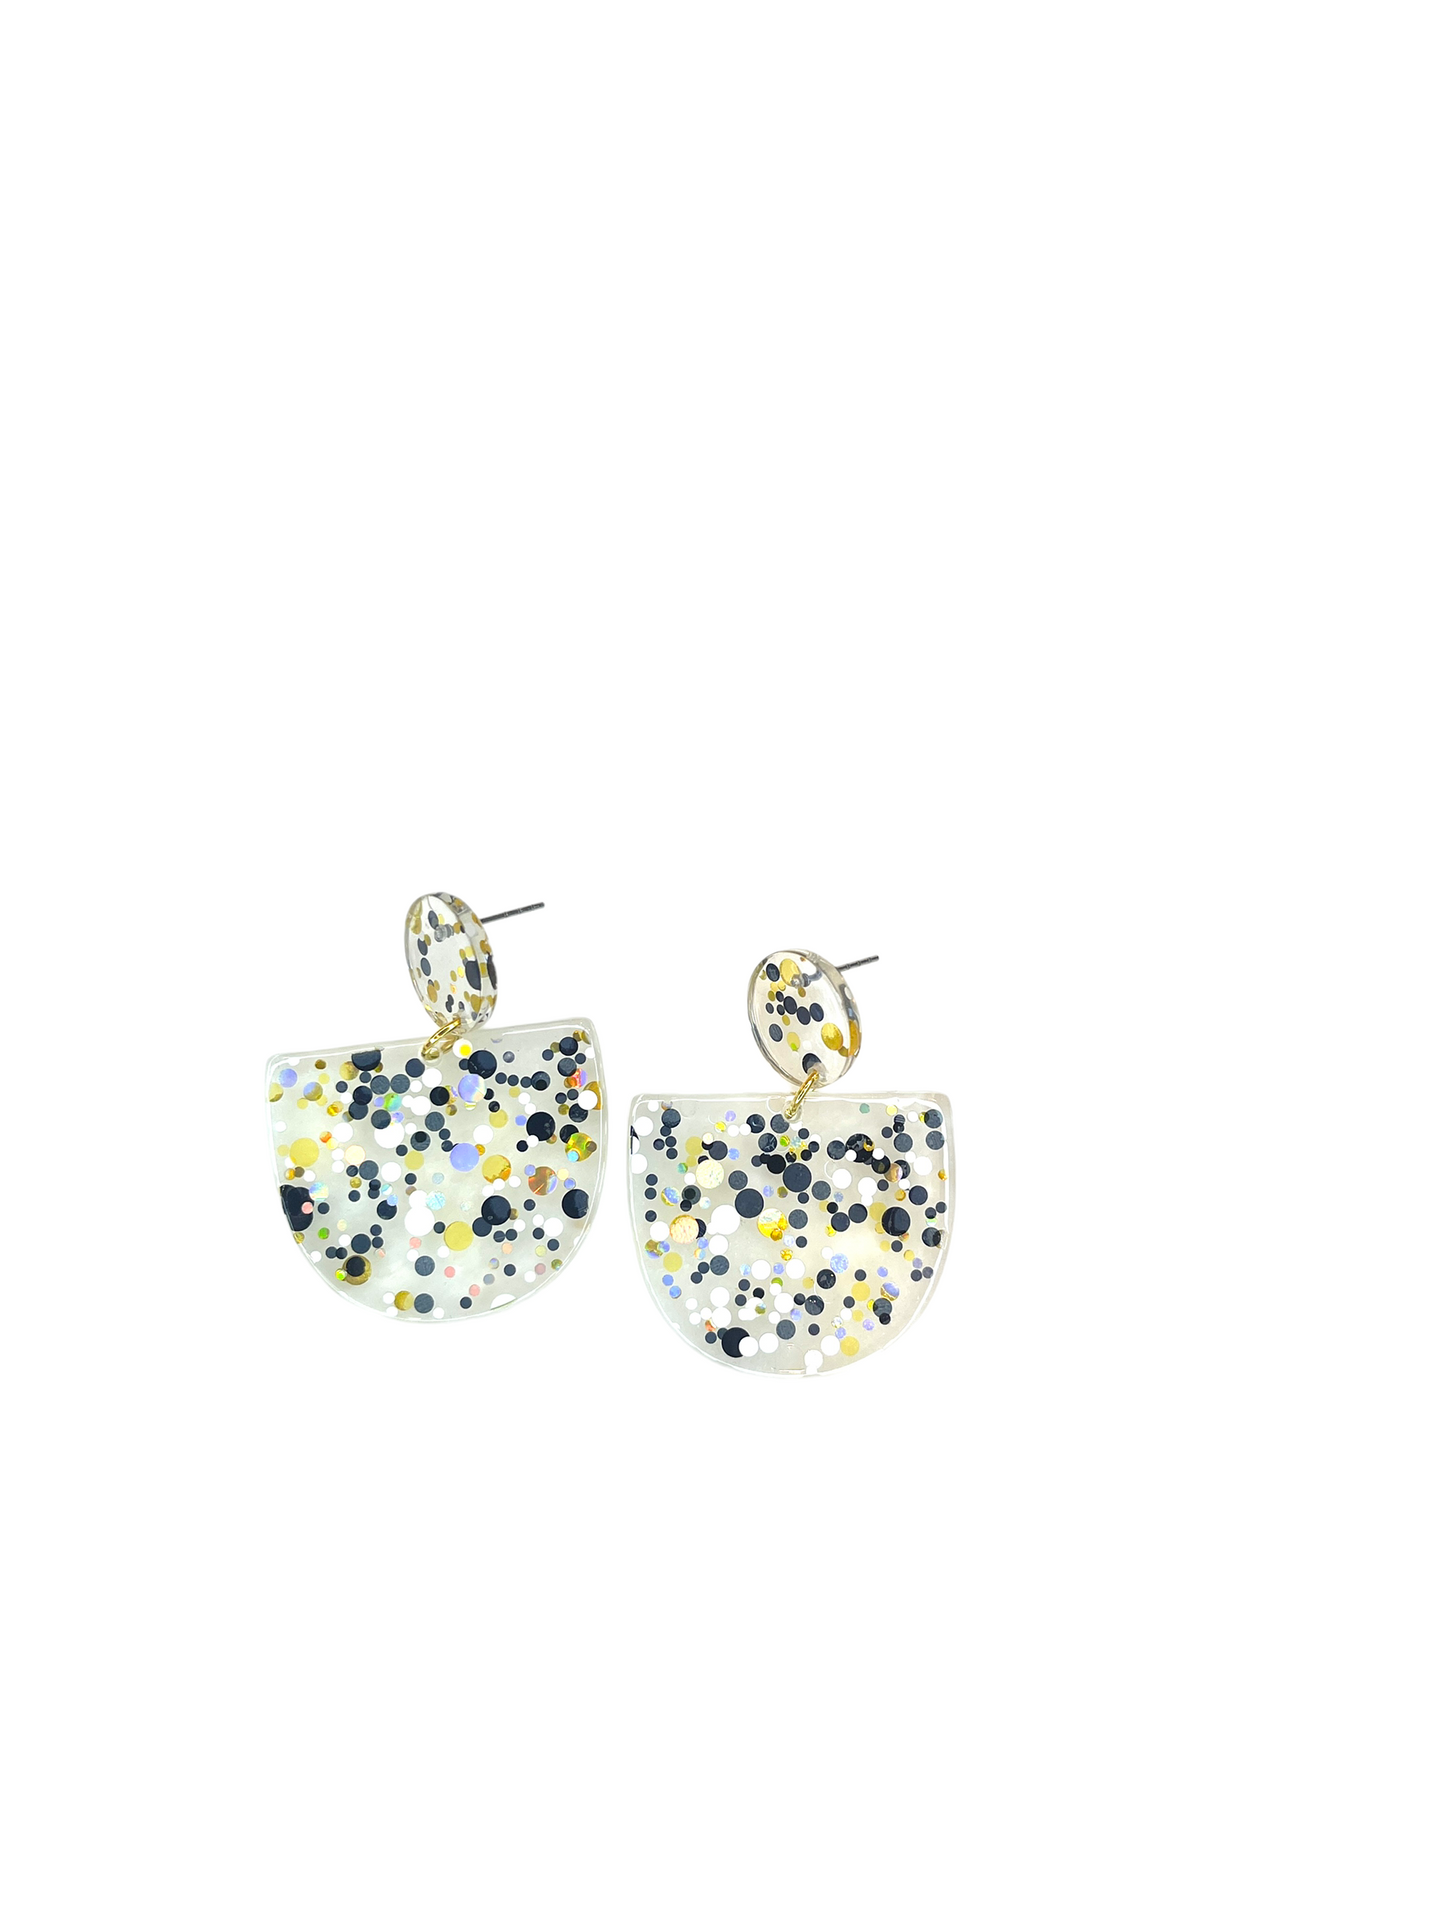 Black and Gold Confetti Earrings